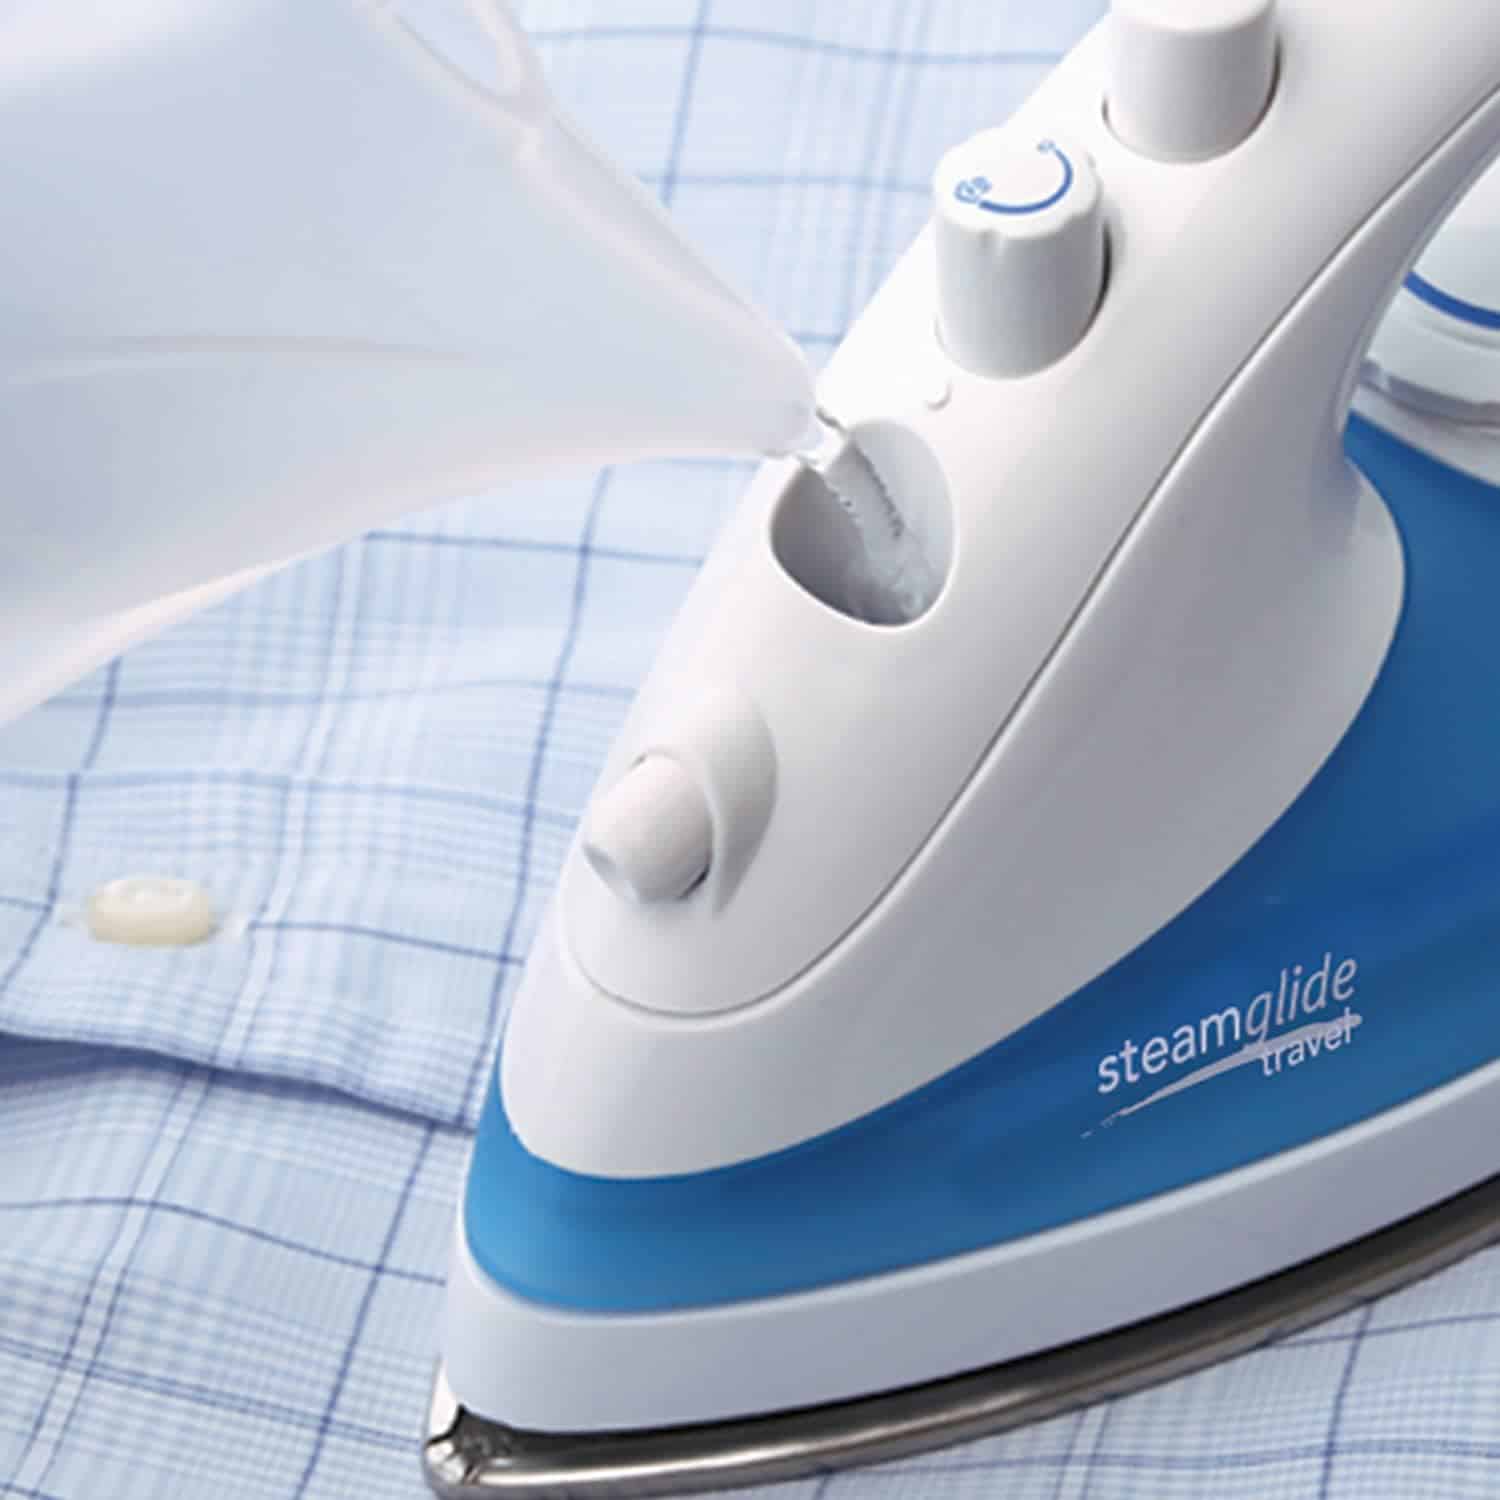 Russell Hobbs Steam Glide Travel Iron 22470, 760 W - White and Blue 6284NO